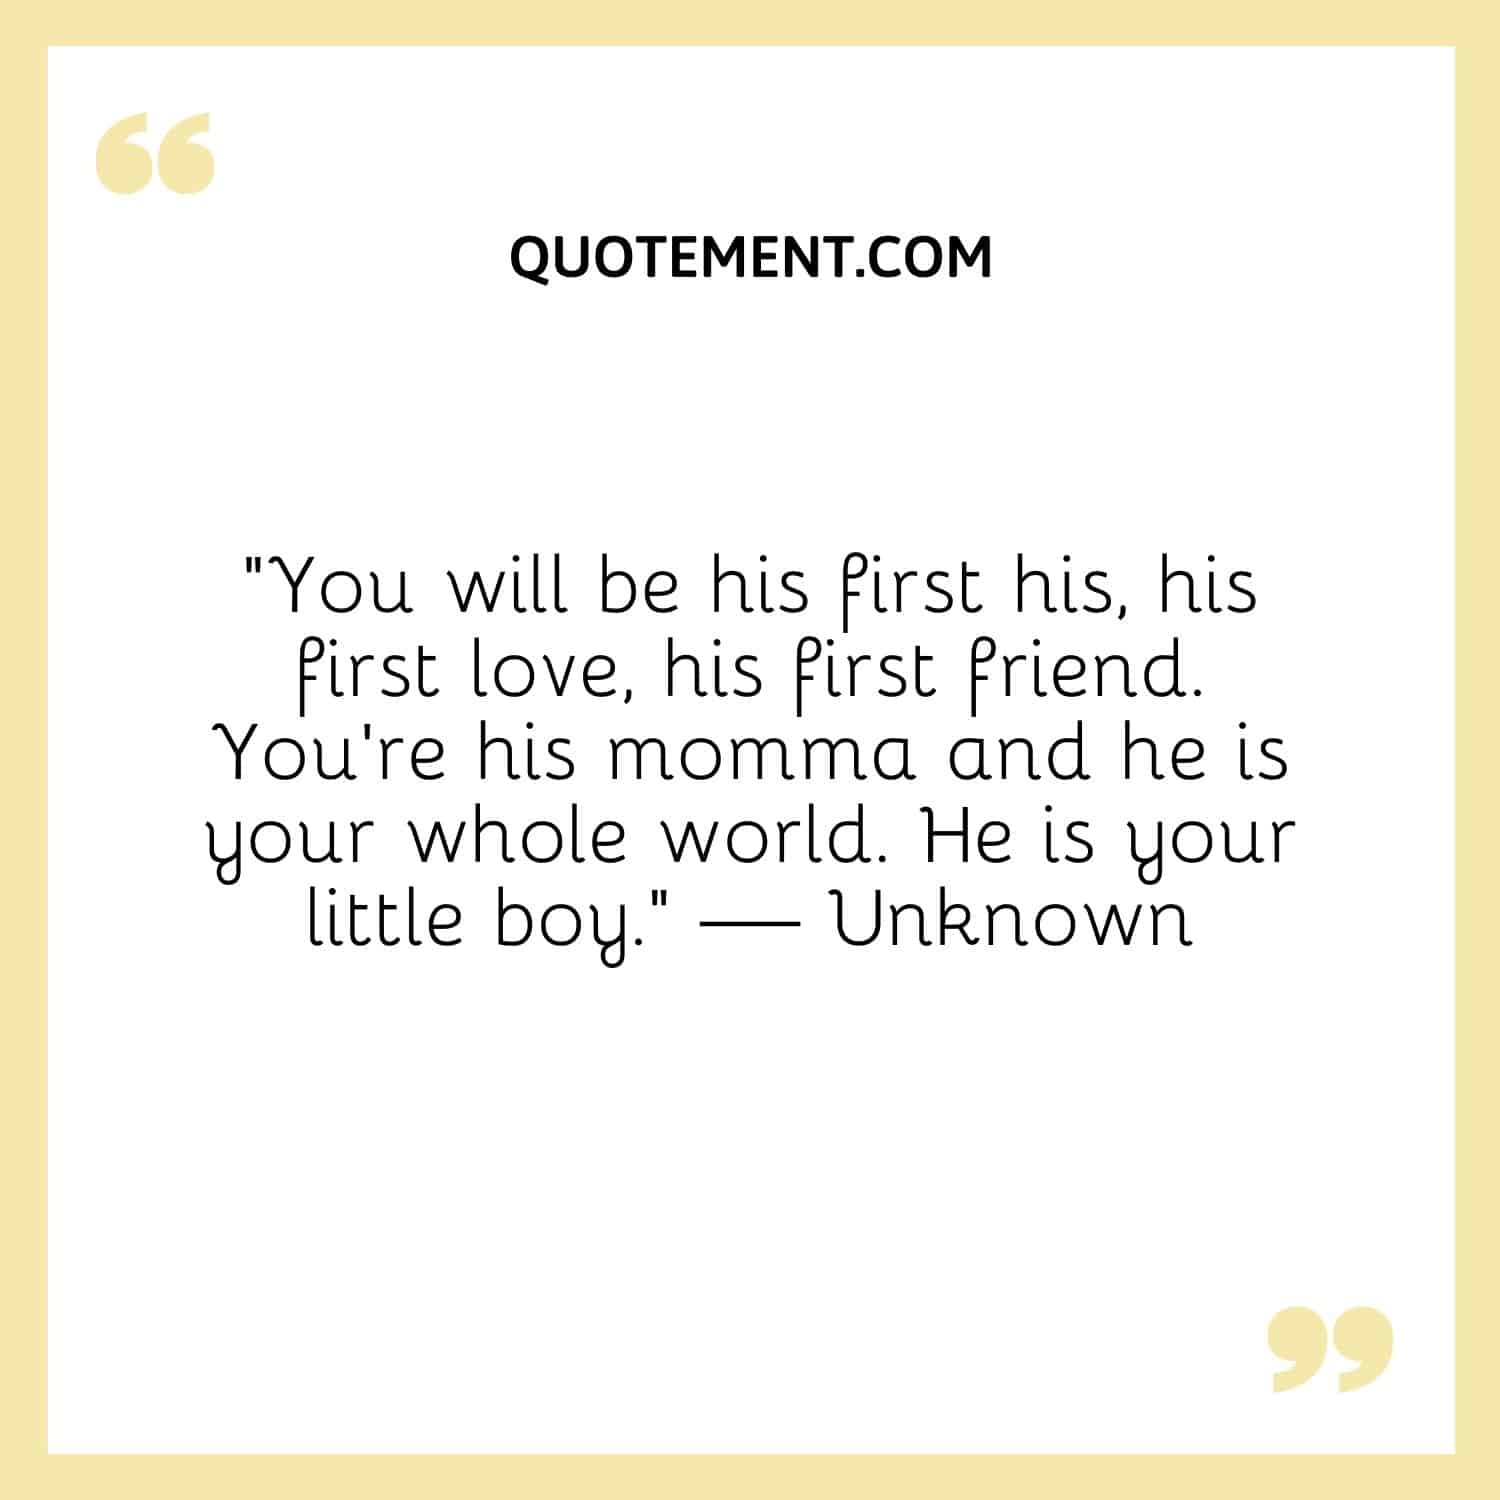 You will be his first his, his first love, his first friend